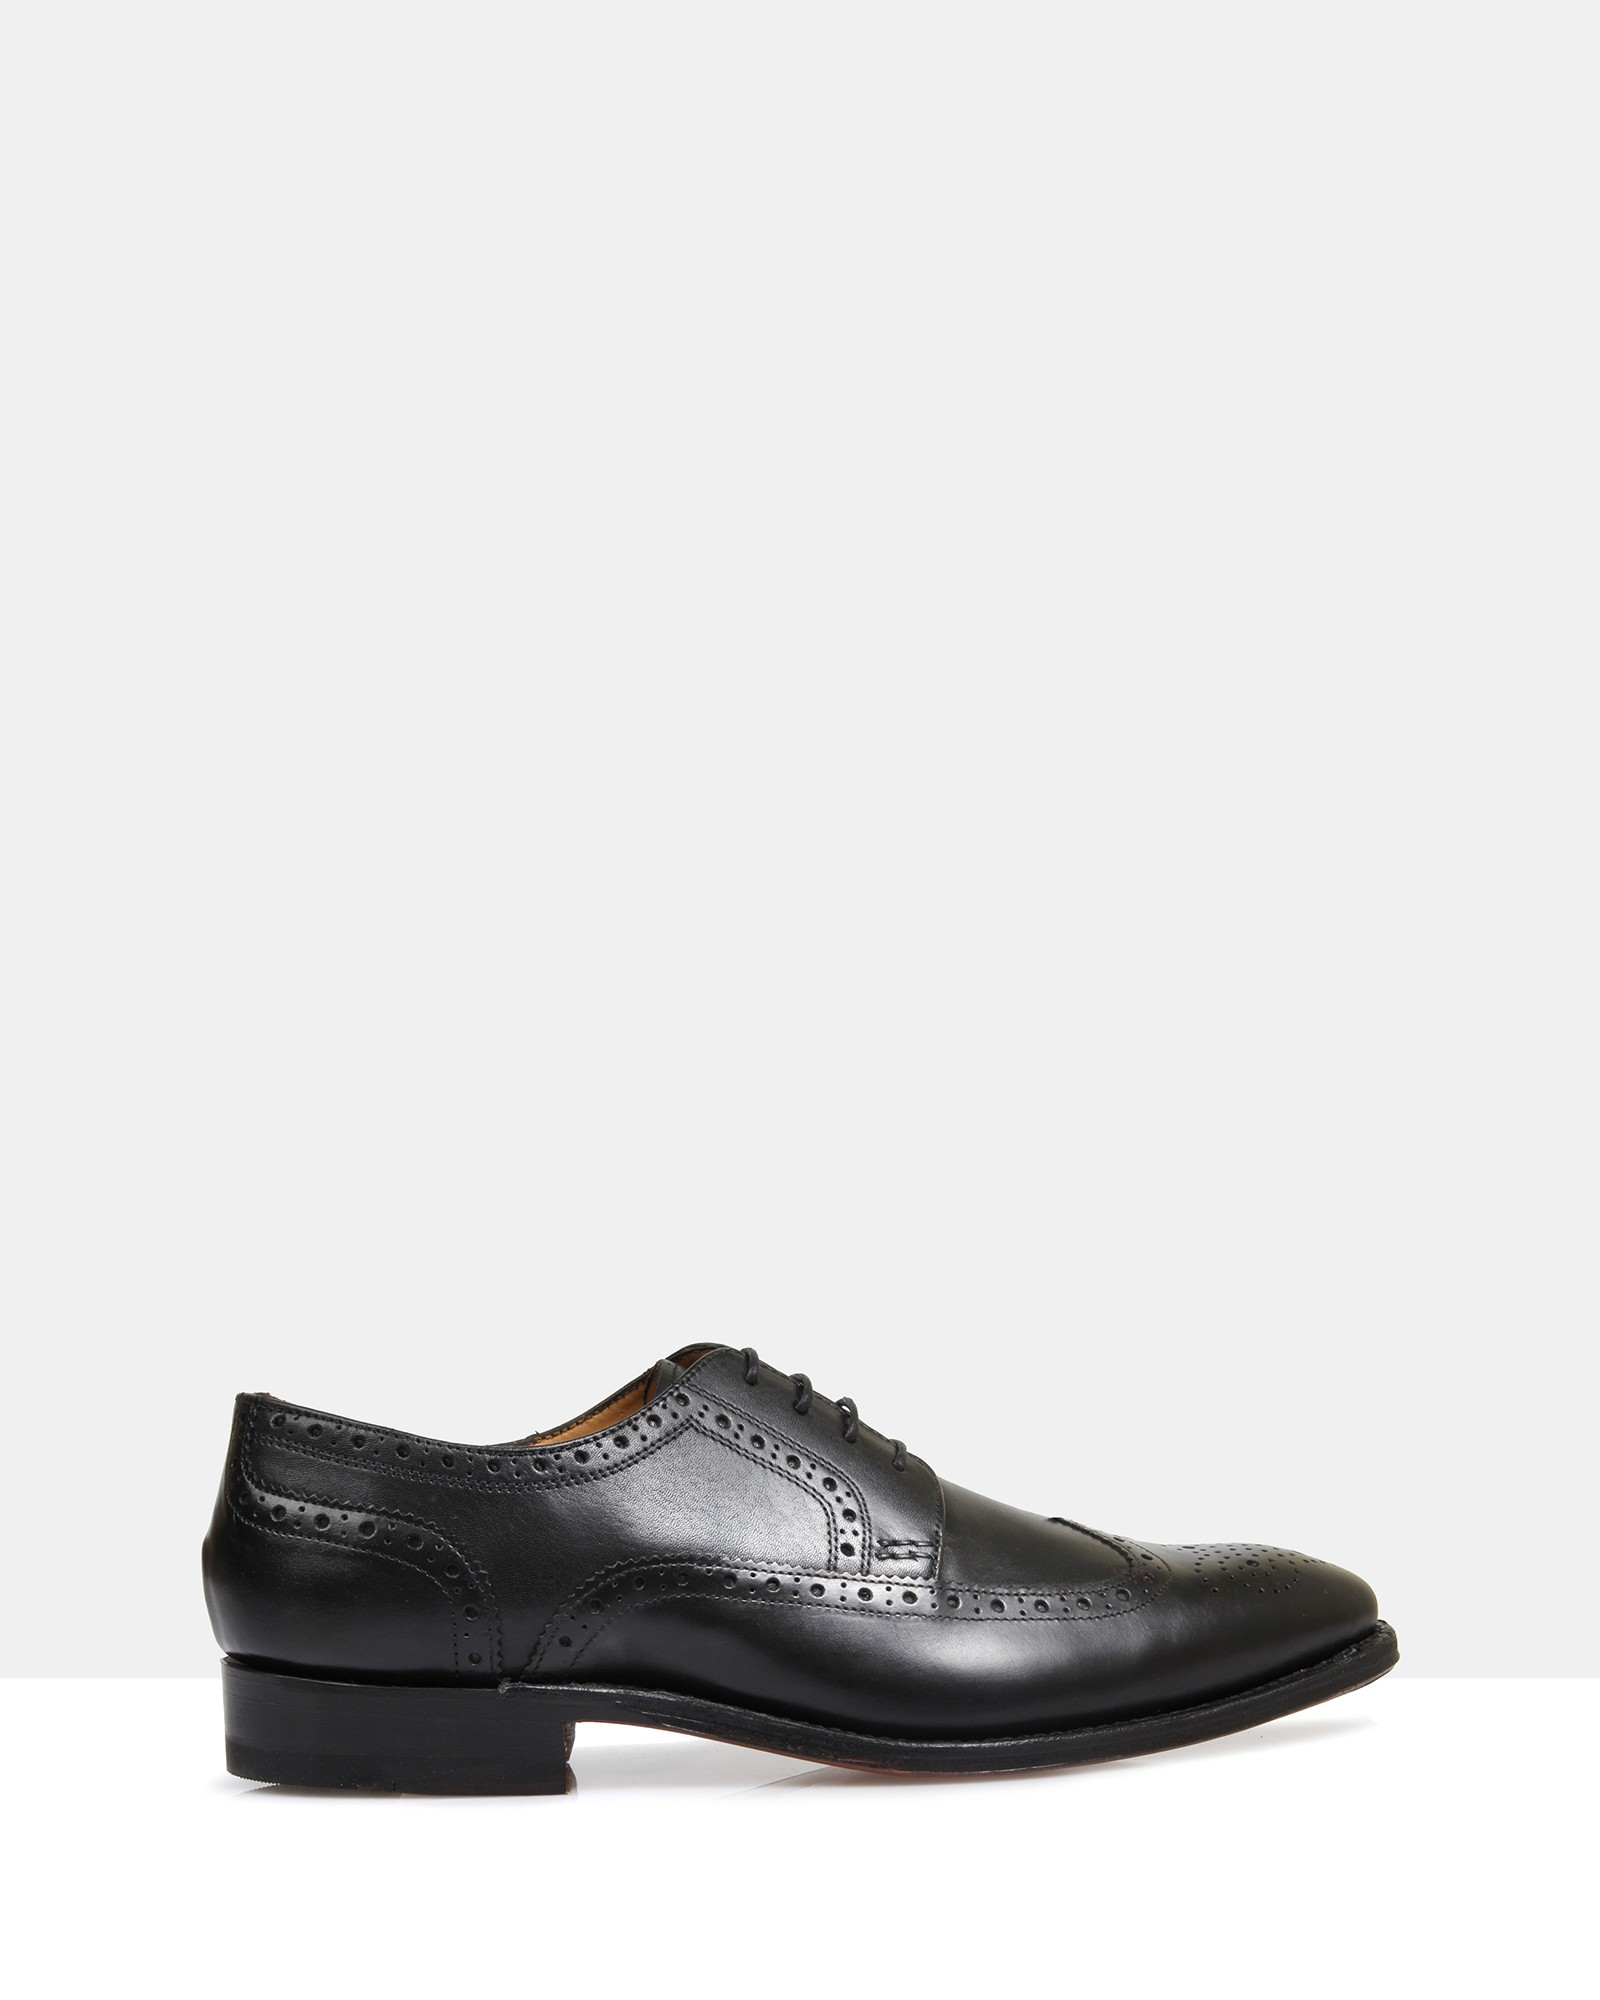 Men's Gold Cup™ Davenport Driver - Loafers & Oxfords | Sperry